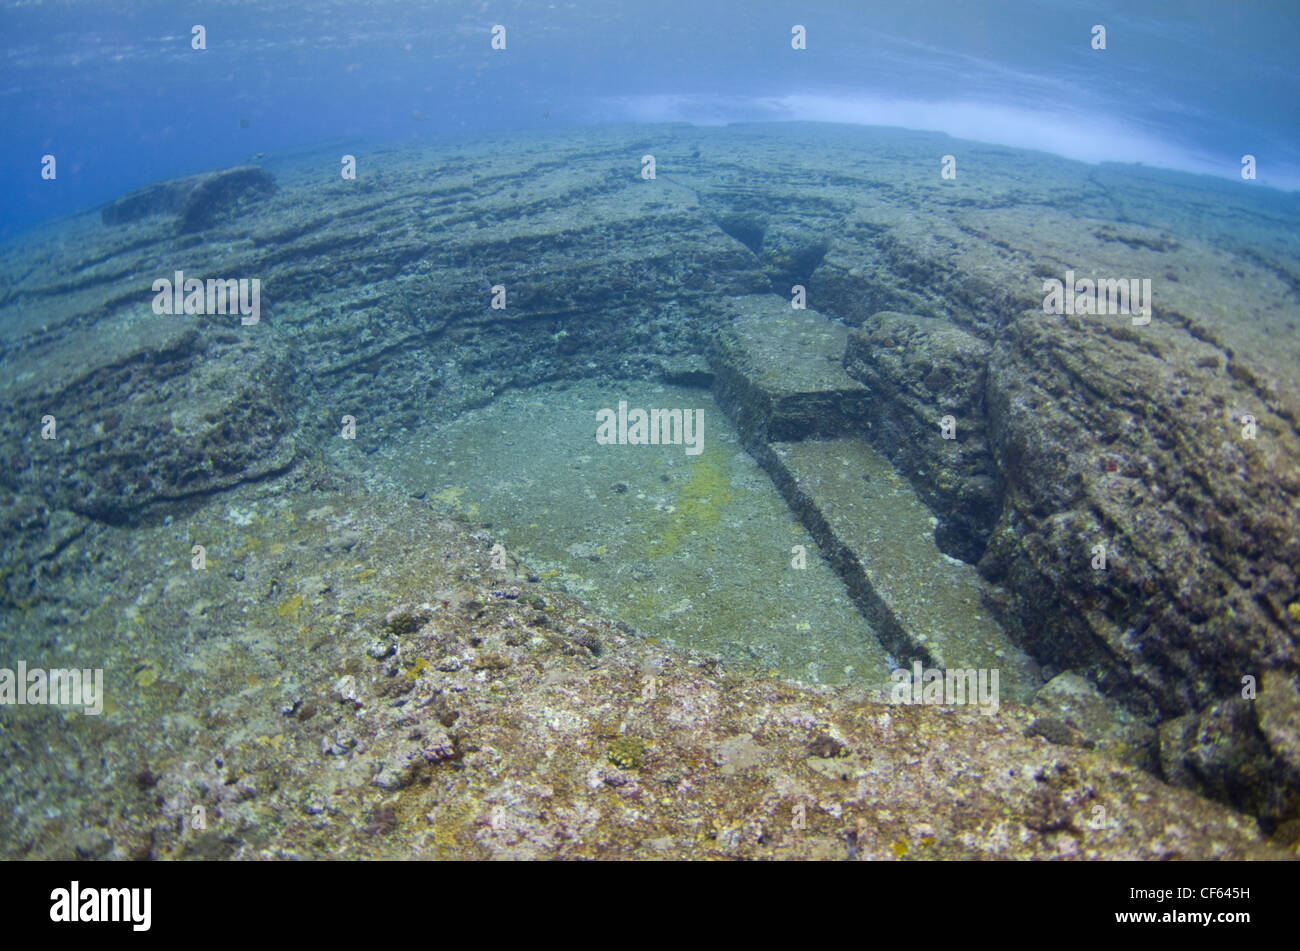 Yonaguni Monument Japan : Yonaguni Monument Japan Assignment Point ...